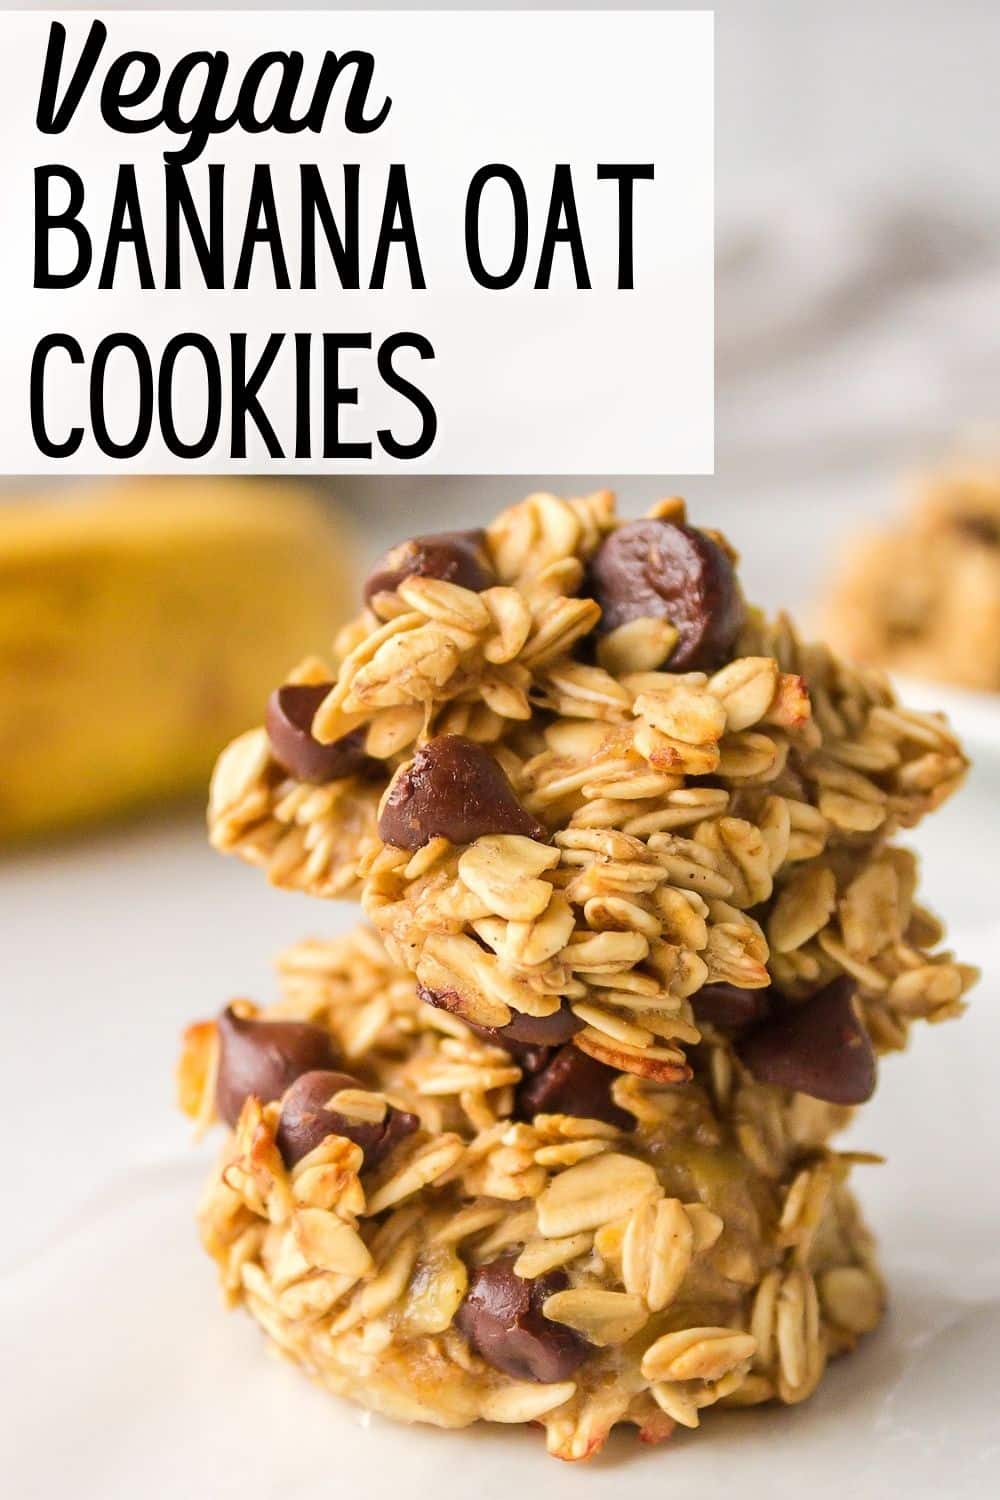 Healthy Banana Oat Cookies with Chocolate Chips - Clean Eating Kitchen